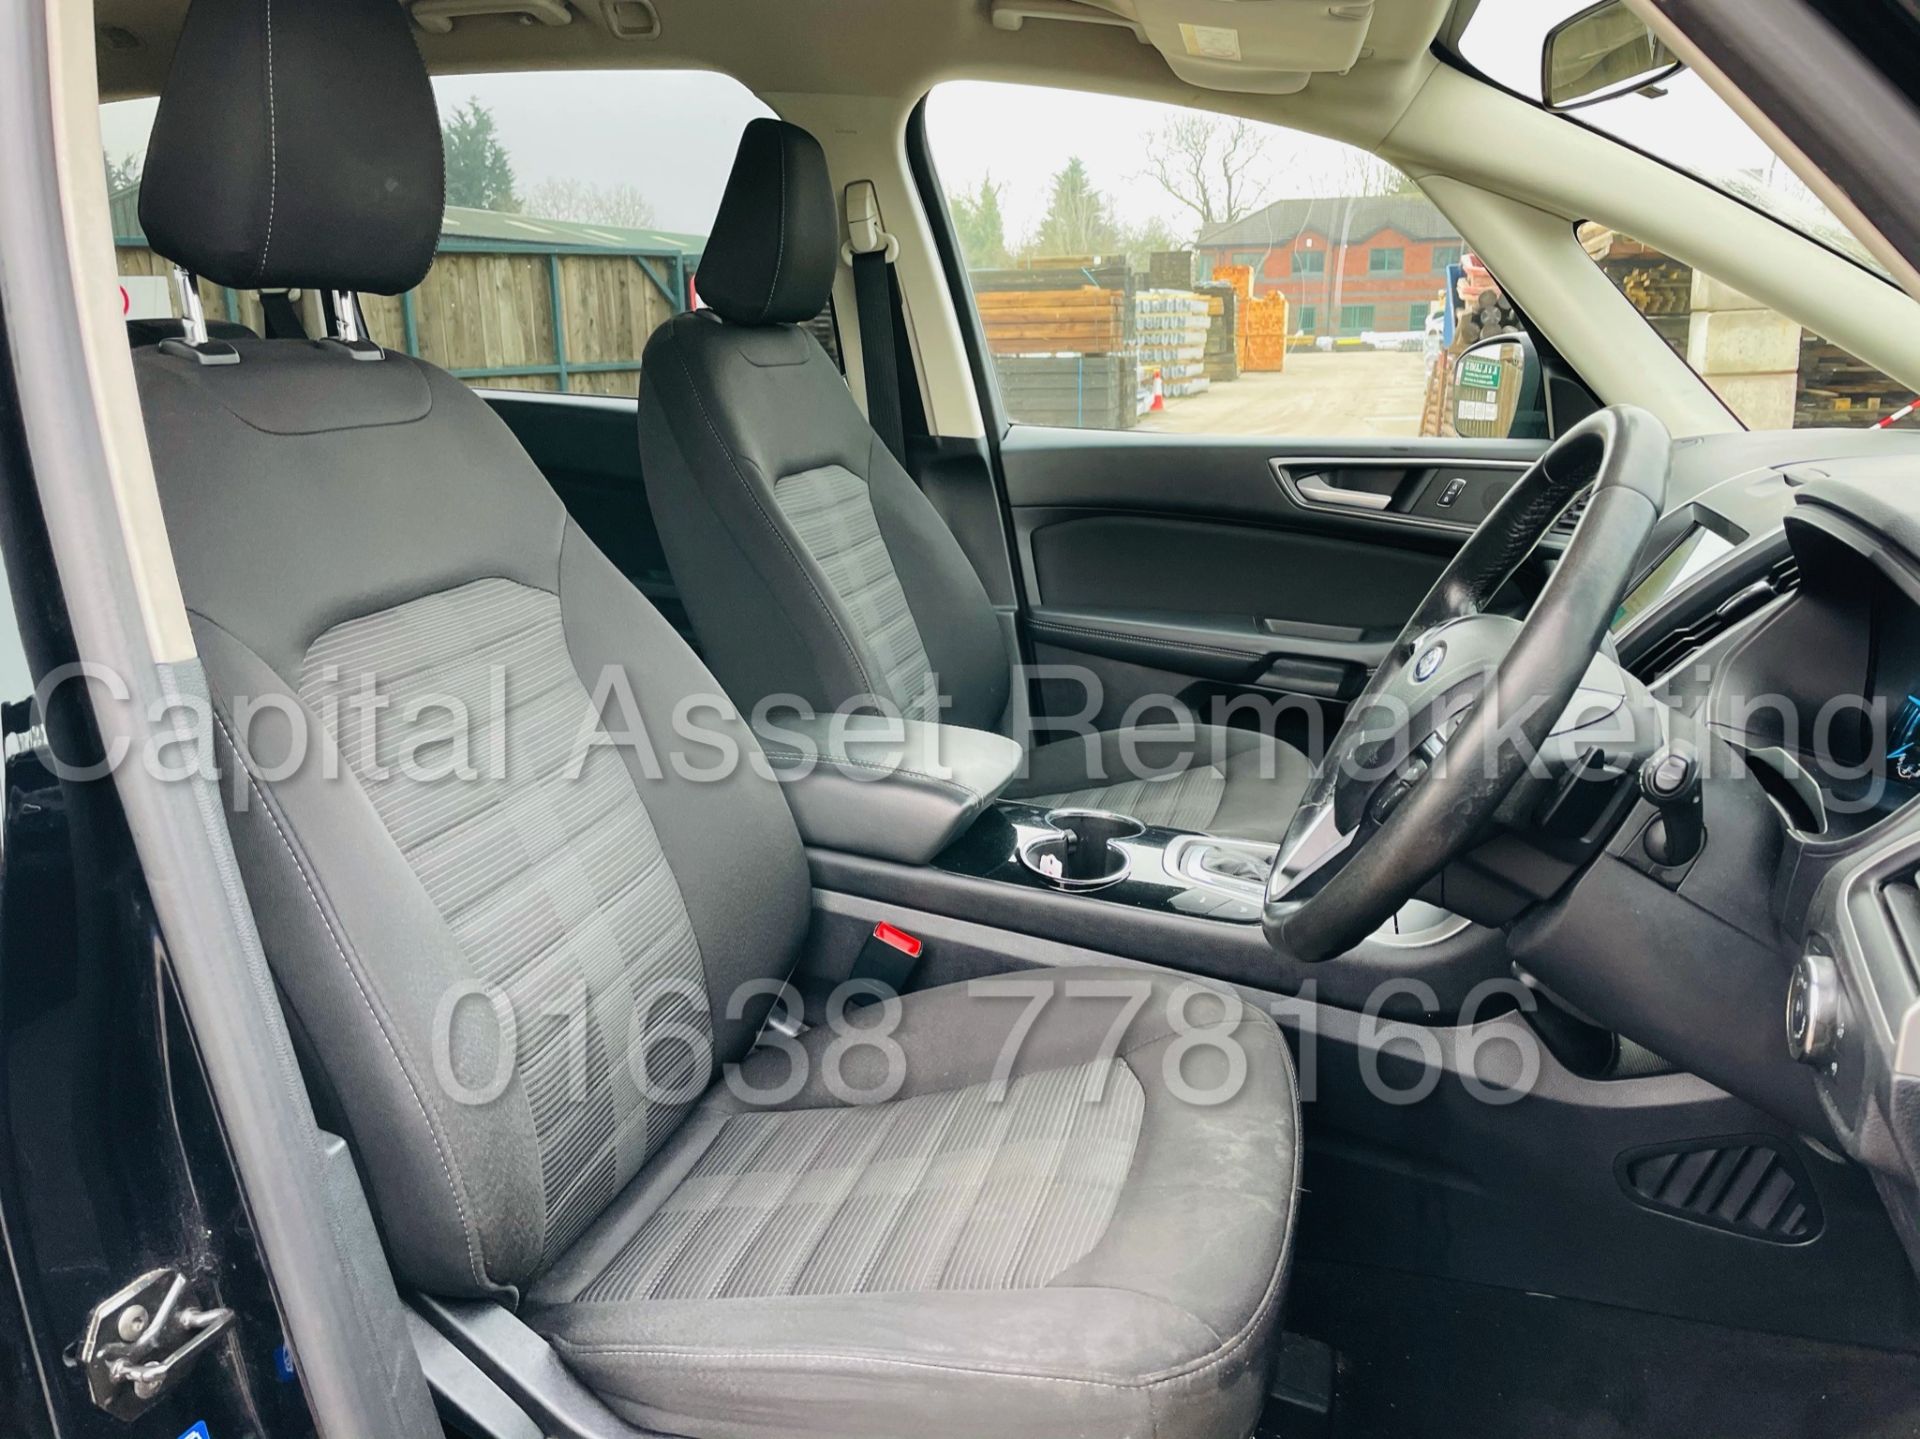 (ON SALE) FORD GALAXY *ZETEC EDITION* 7 SEATER MPV (2017 - EURO 6) '2.0 TDCI - AUTO' (1 OWNER) - Image 33 of 48